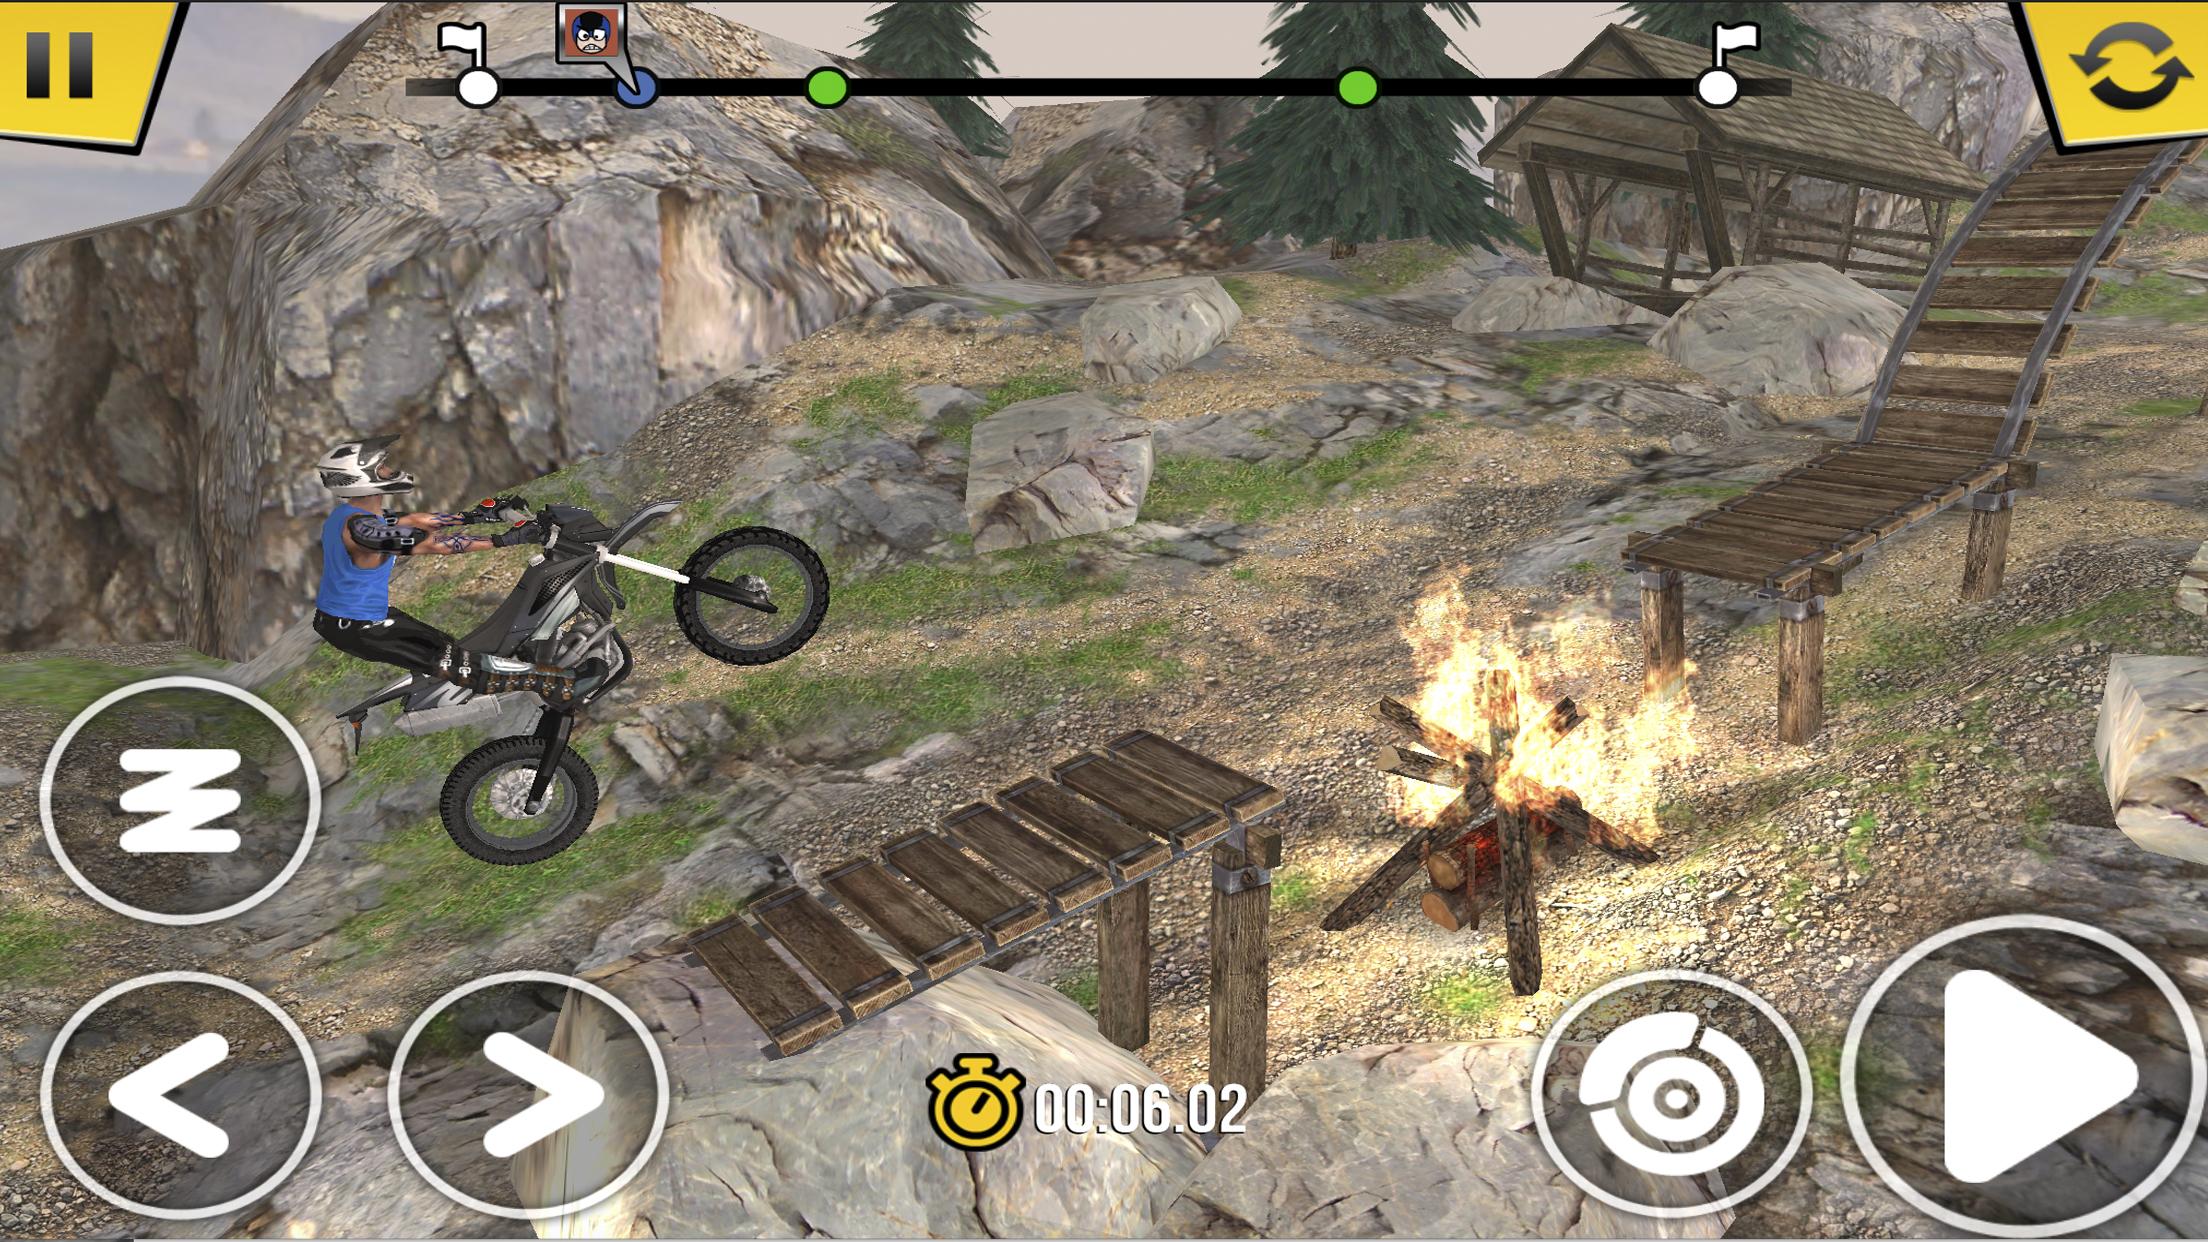 Trial Xtreme Bike Racing APK 2.13.3 for Android – Download Trial Xtreme 4 Bike Racing XAPK (APK + OBB Data) Latest Version from APKFab.com